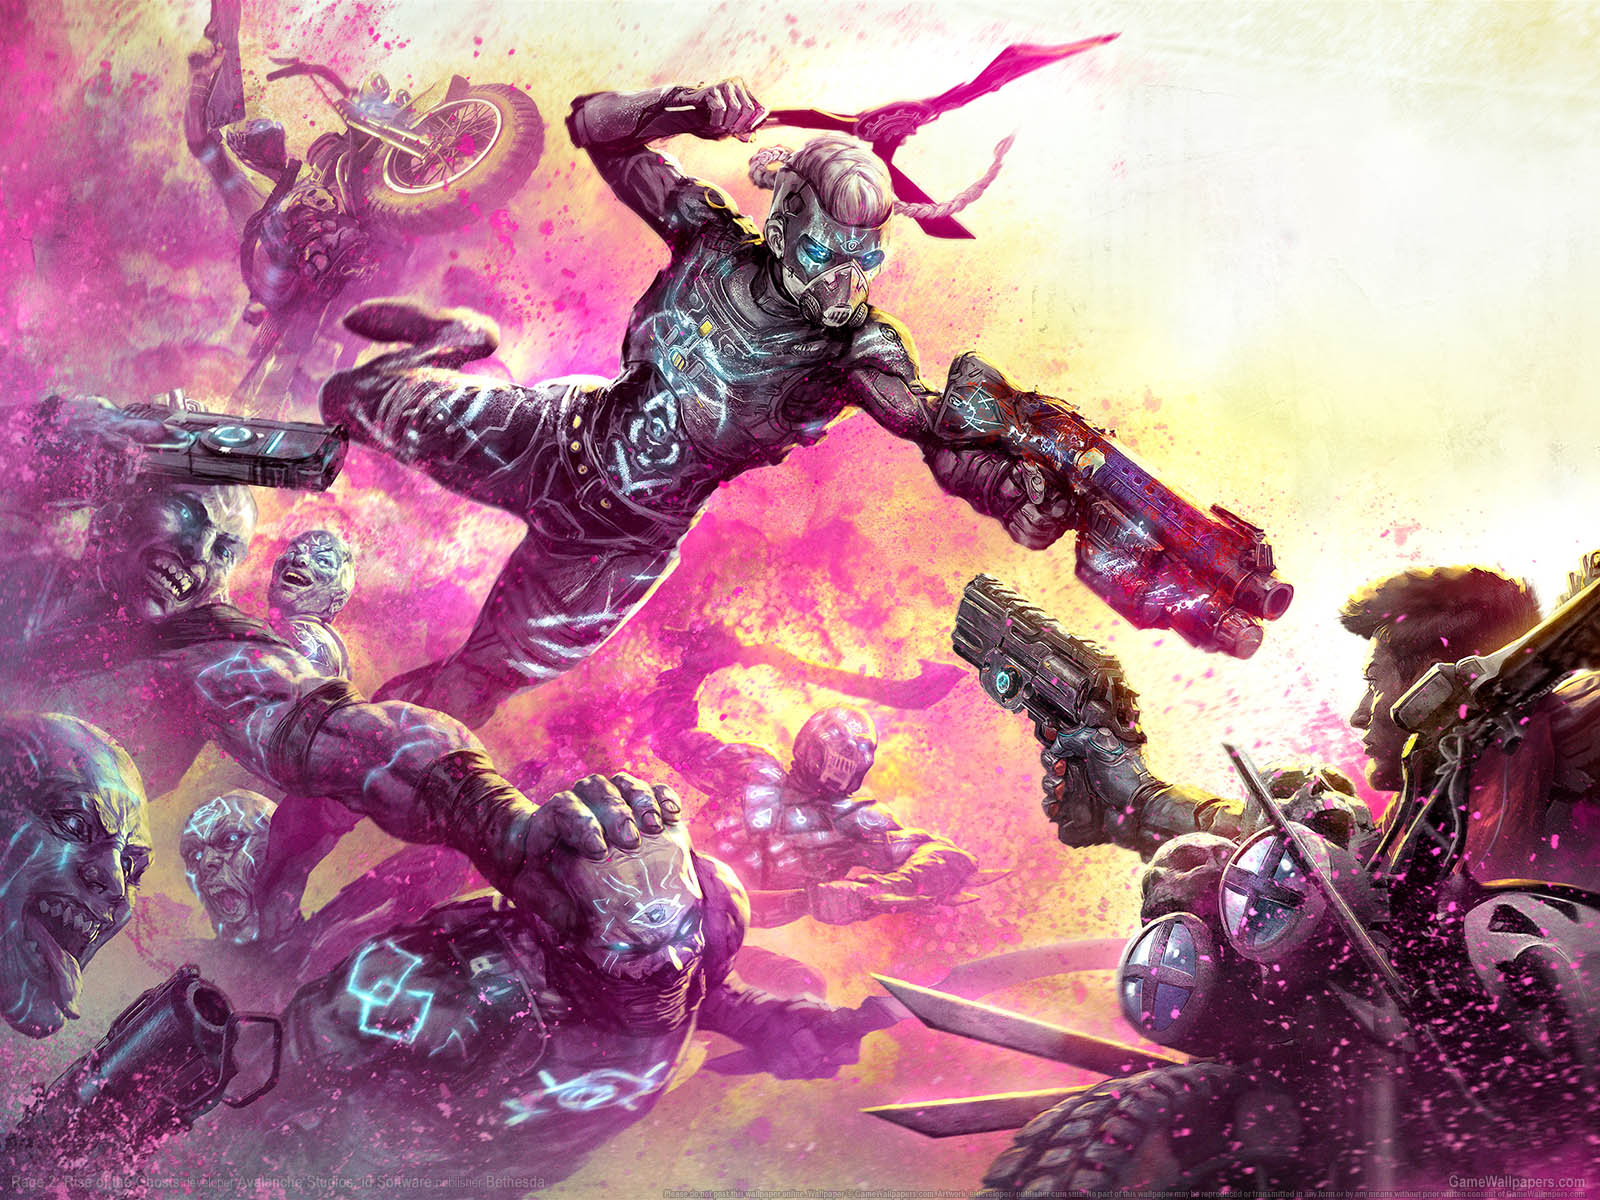 Rage 2%25253A Rise of the Ghosts wallpaper 01 1600x1200